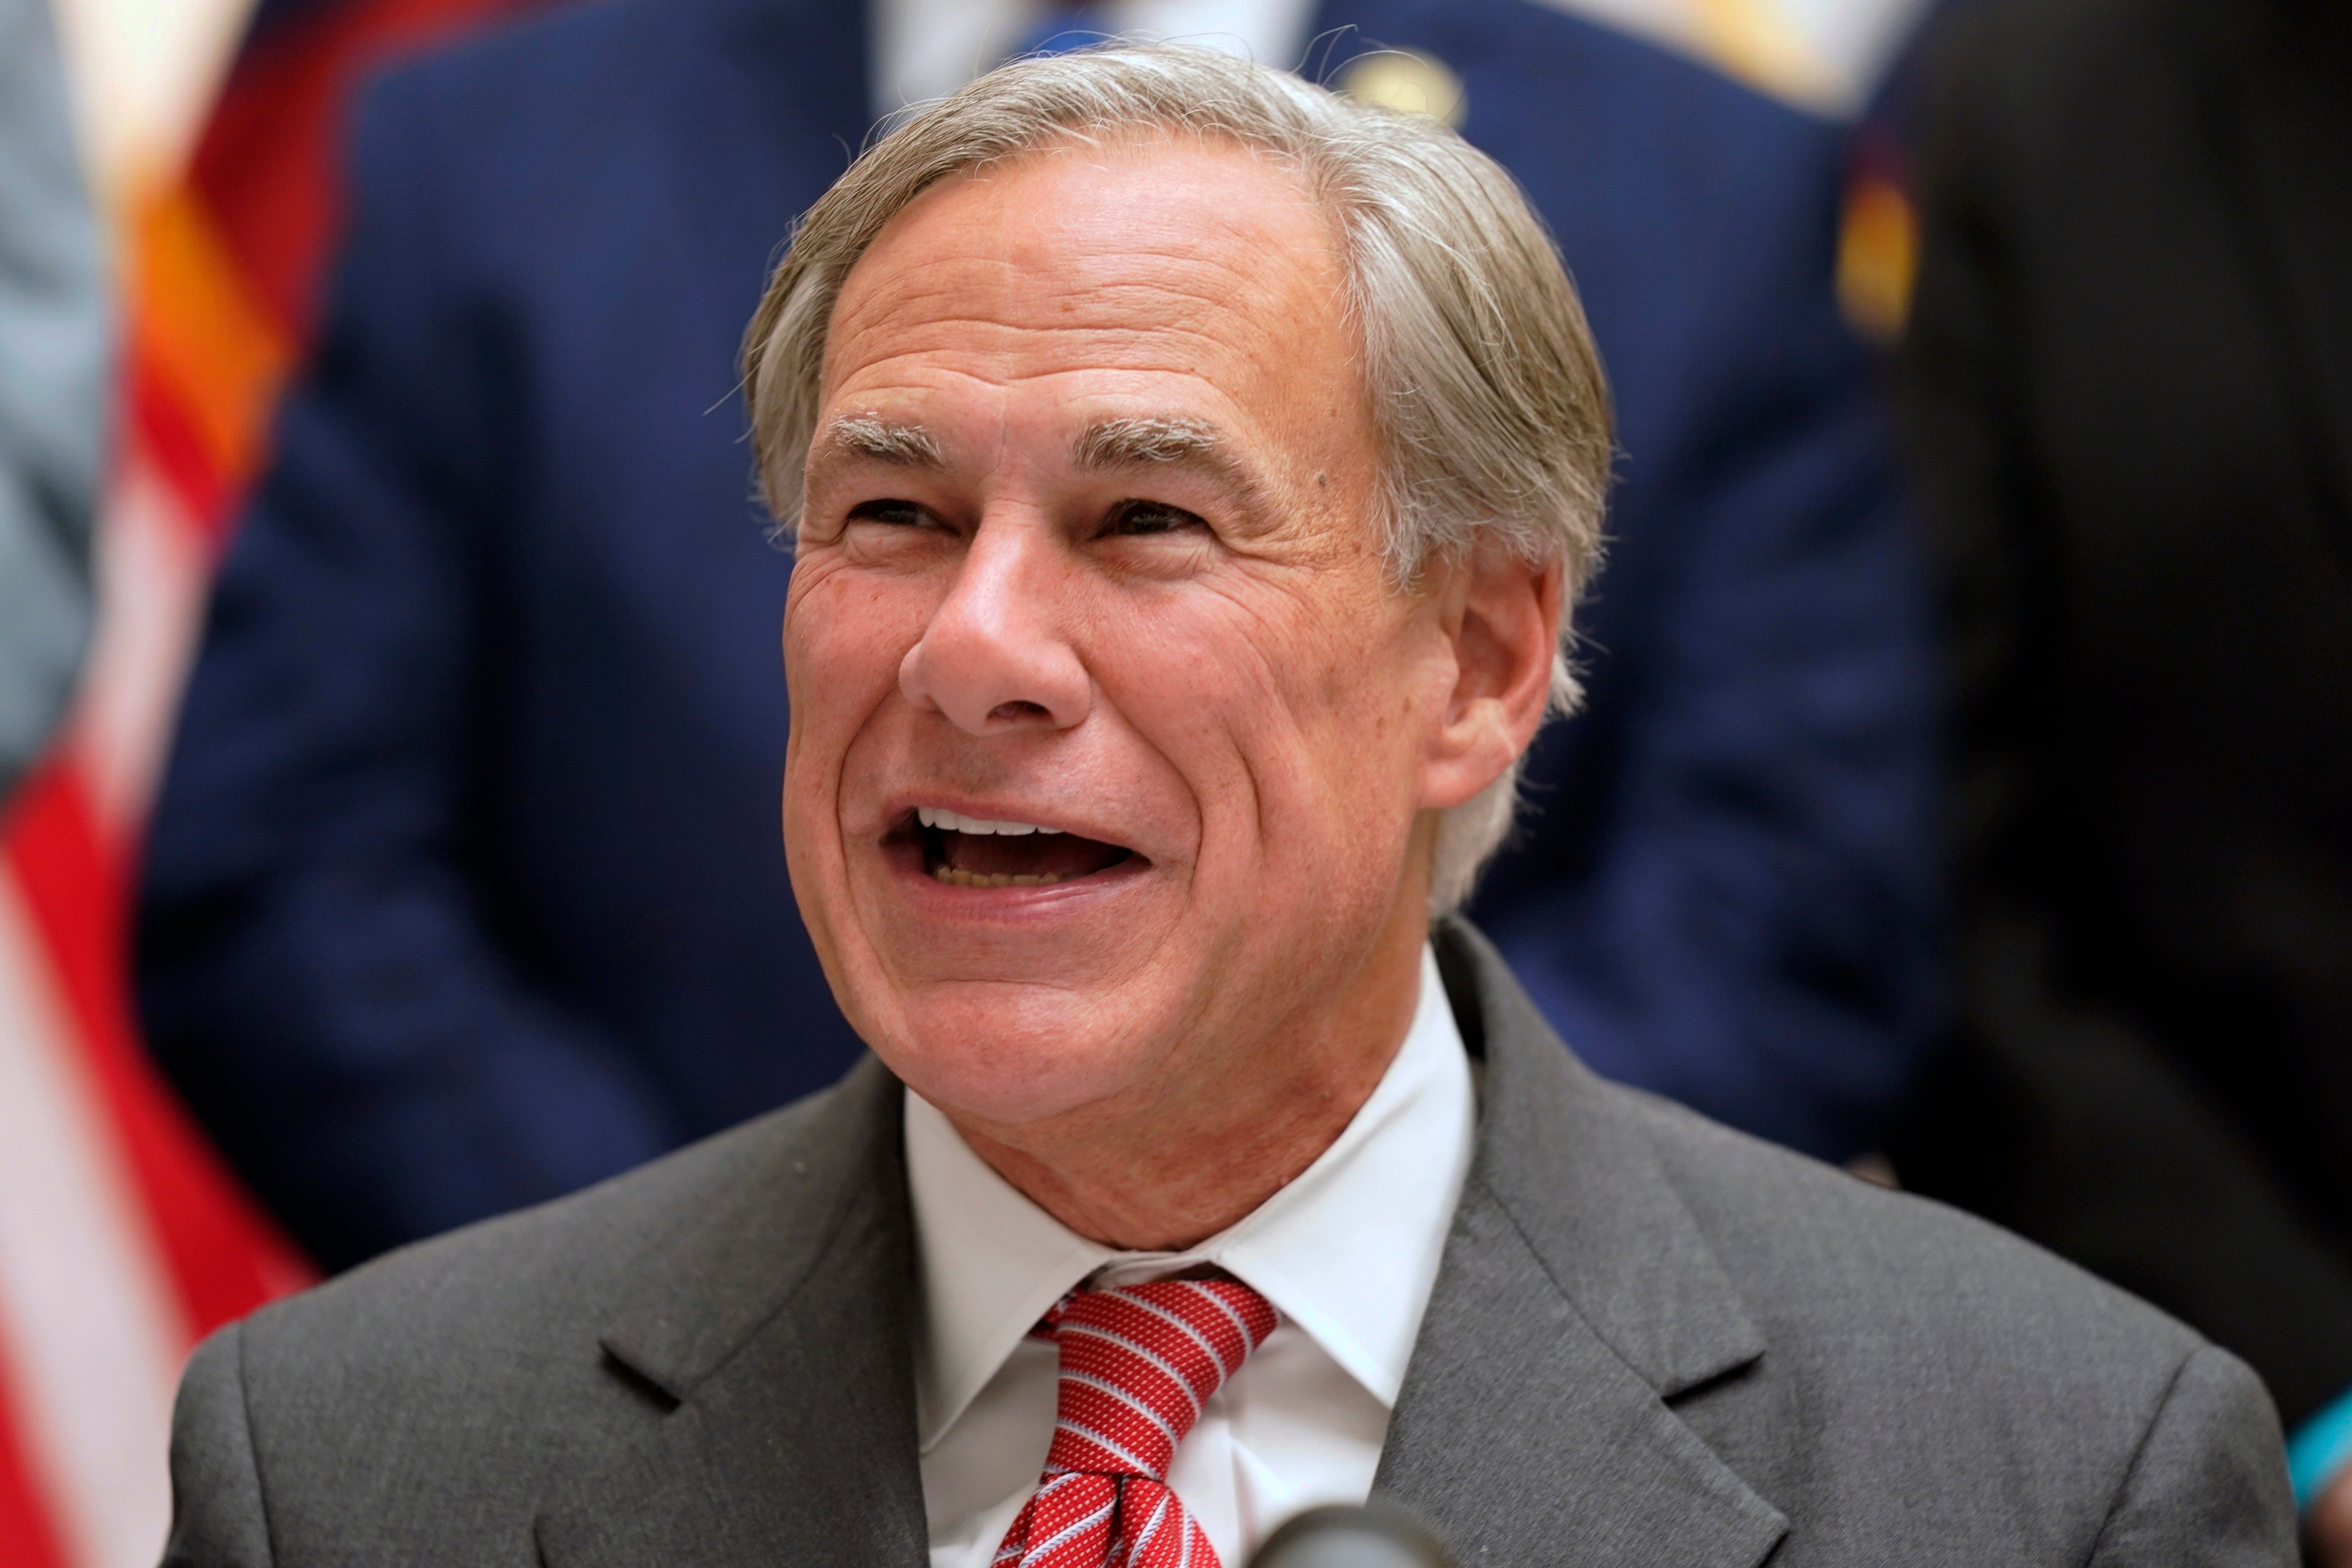 Greg Abbott has relaxed the state’s gun laws